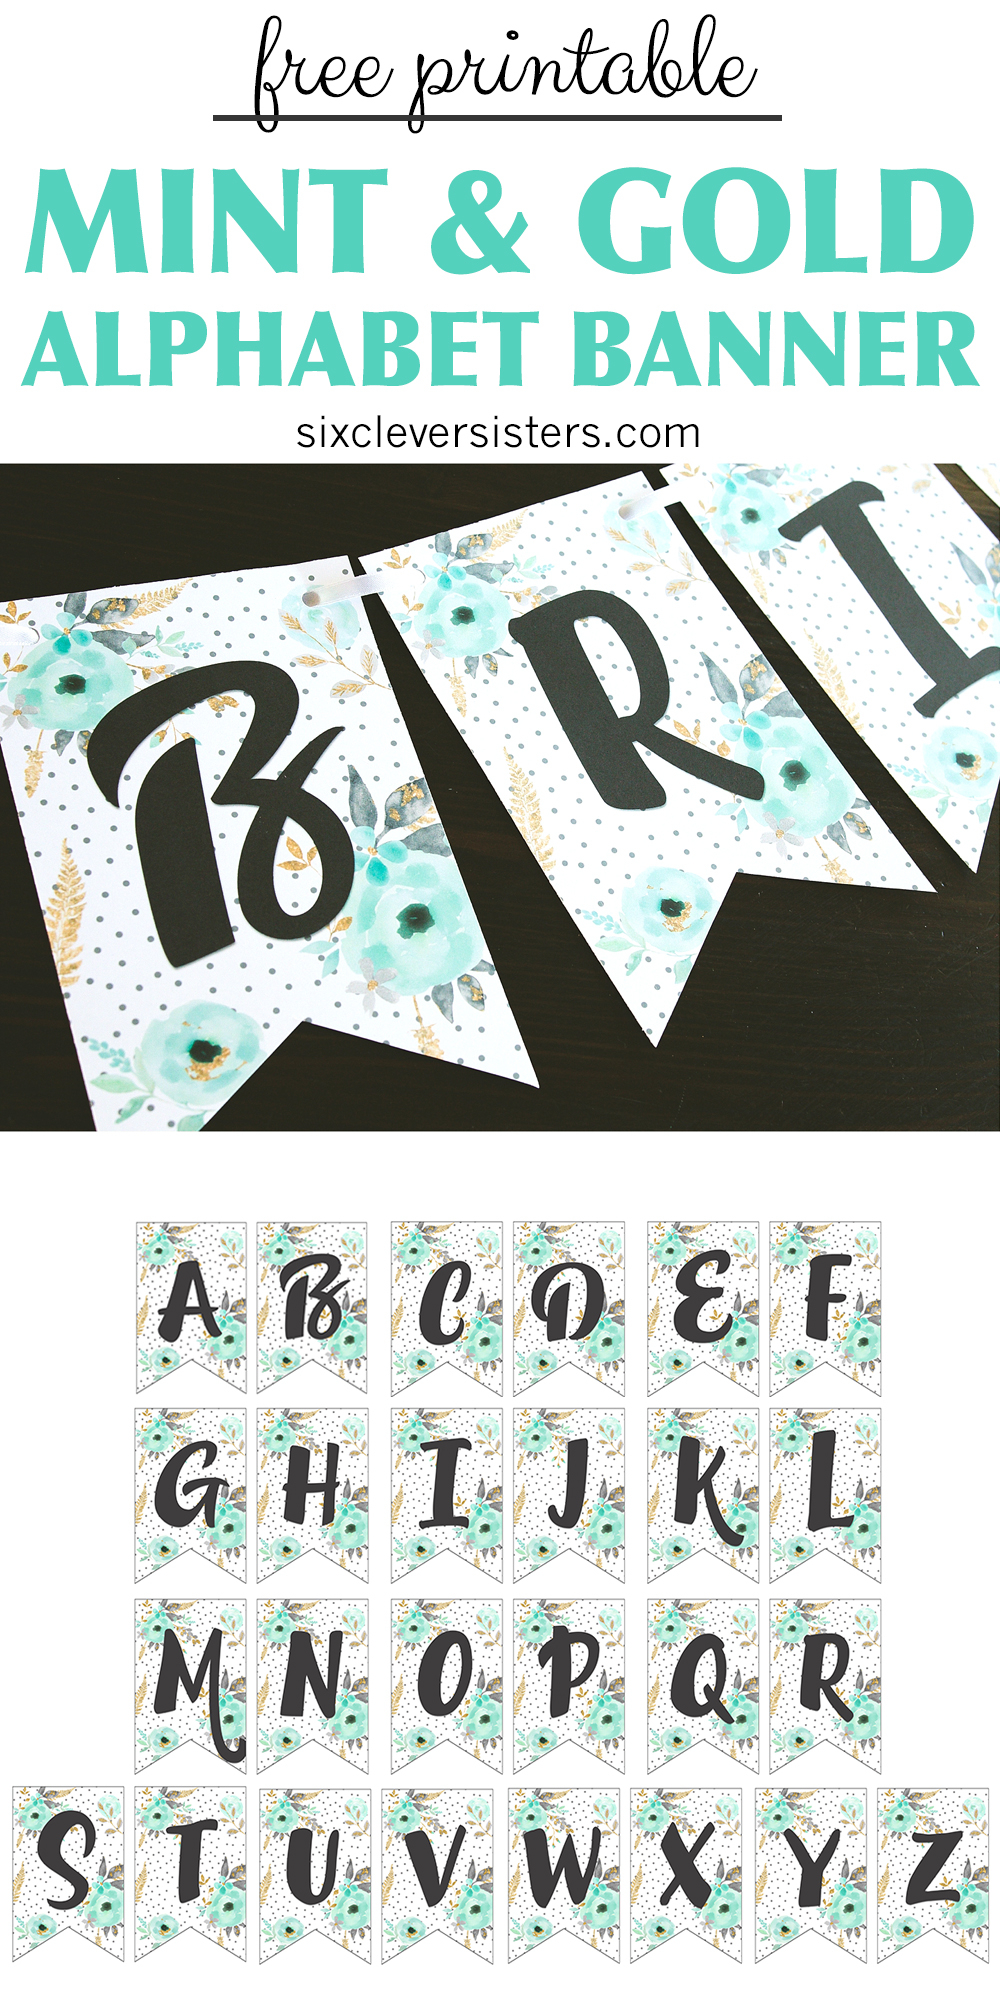 Free Printable Alphabet Banner MINT& GOLD – Six Clever Sisters For Printable Letter Templates For Banners